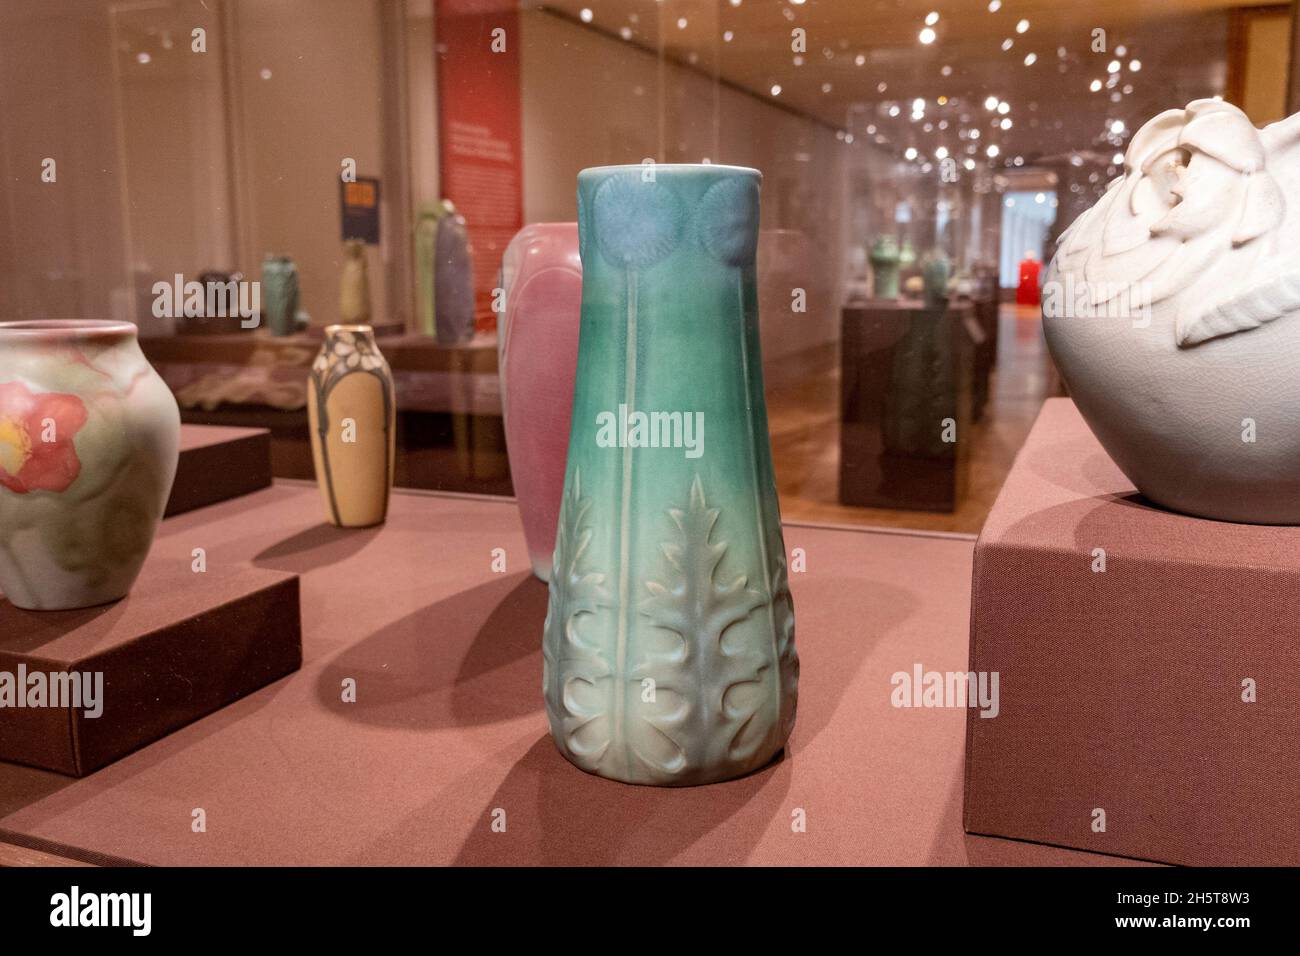 Ausstellung „Gifts from the Fire: American Ceramics“ im Metropolitan Museum of Art in New York City, USA Stockfoto